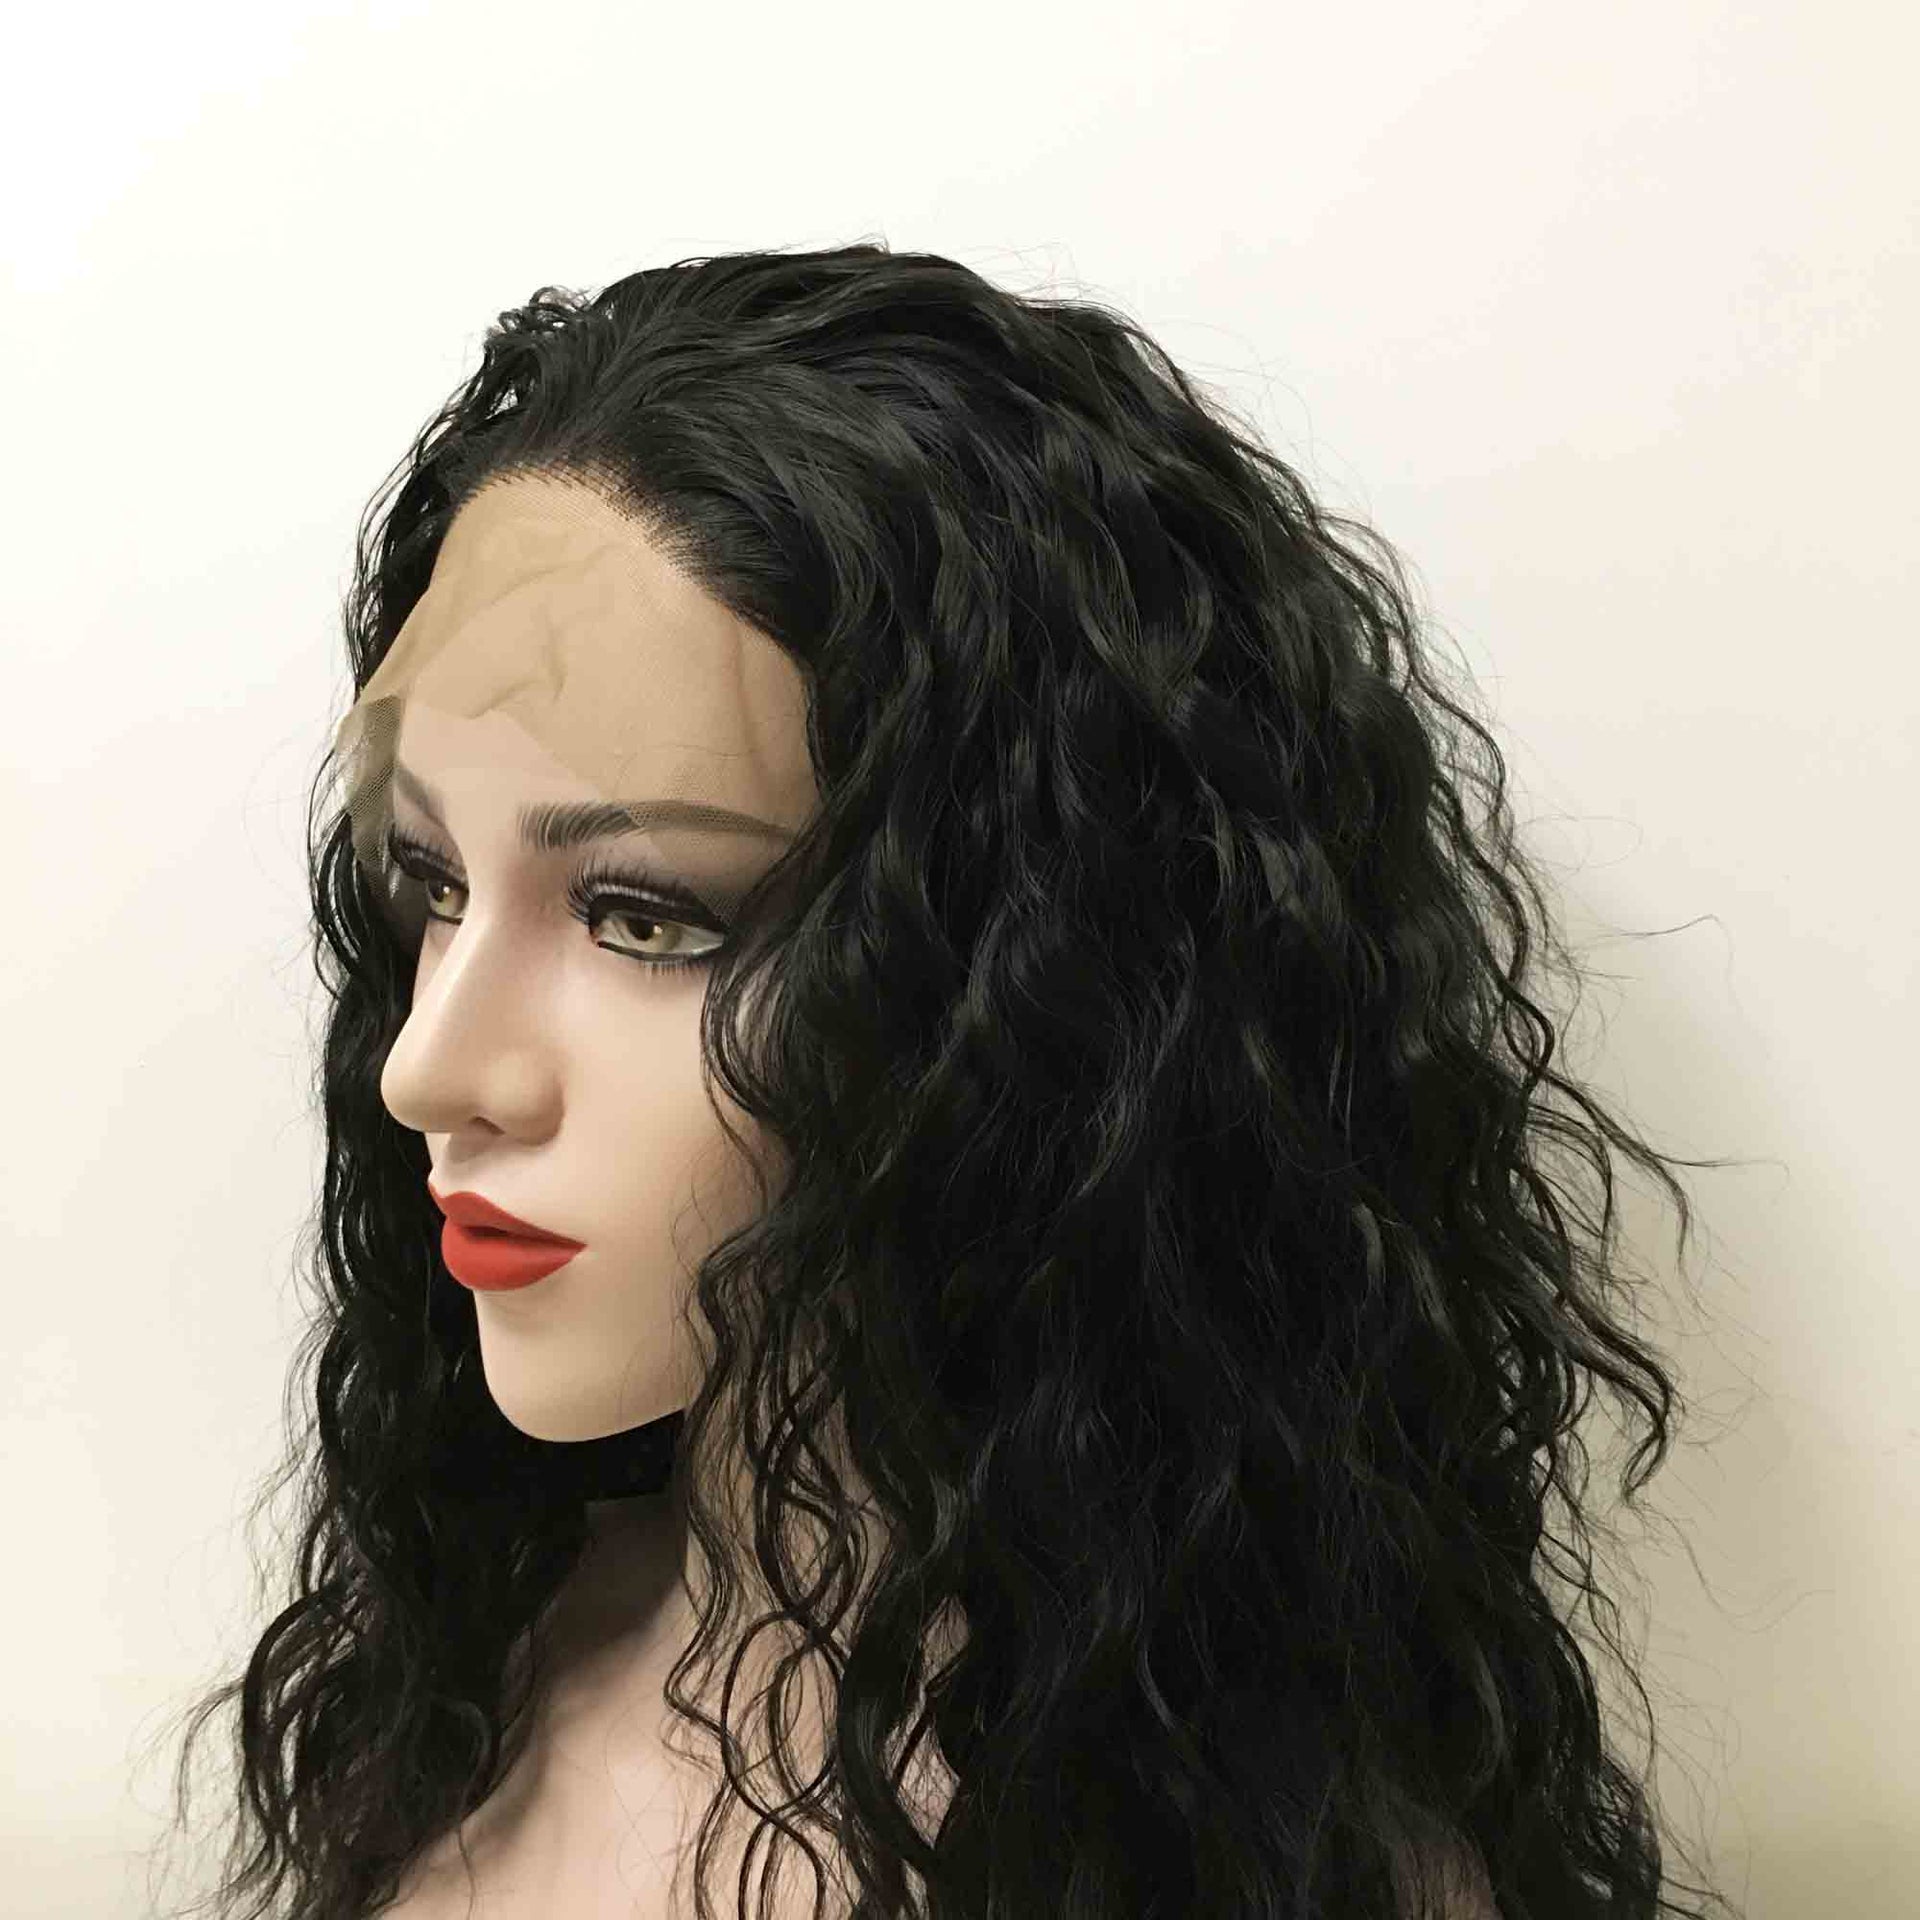 nevermindyrhead Women Black lace Front Free Part Curly Fluffy Layers Thick Volume Wig